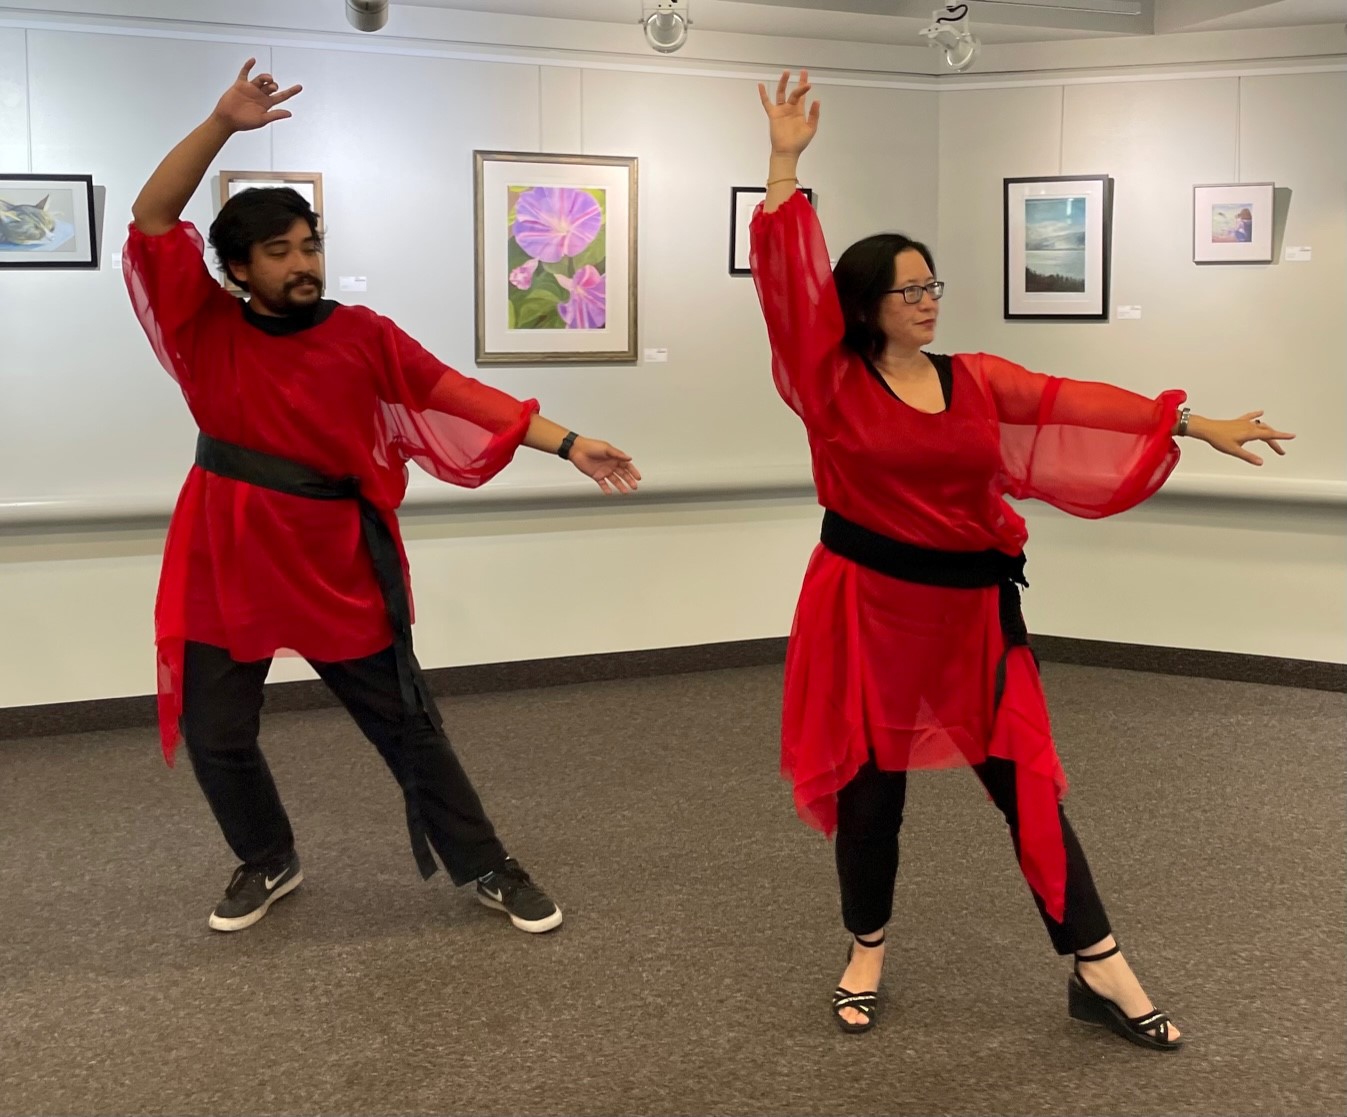 A man and woman in red dresses, dancing with their posed arms.